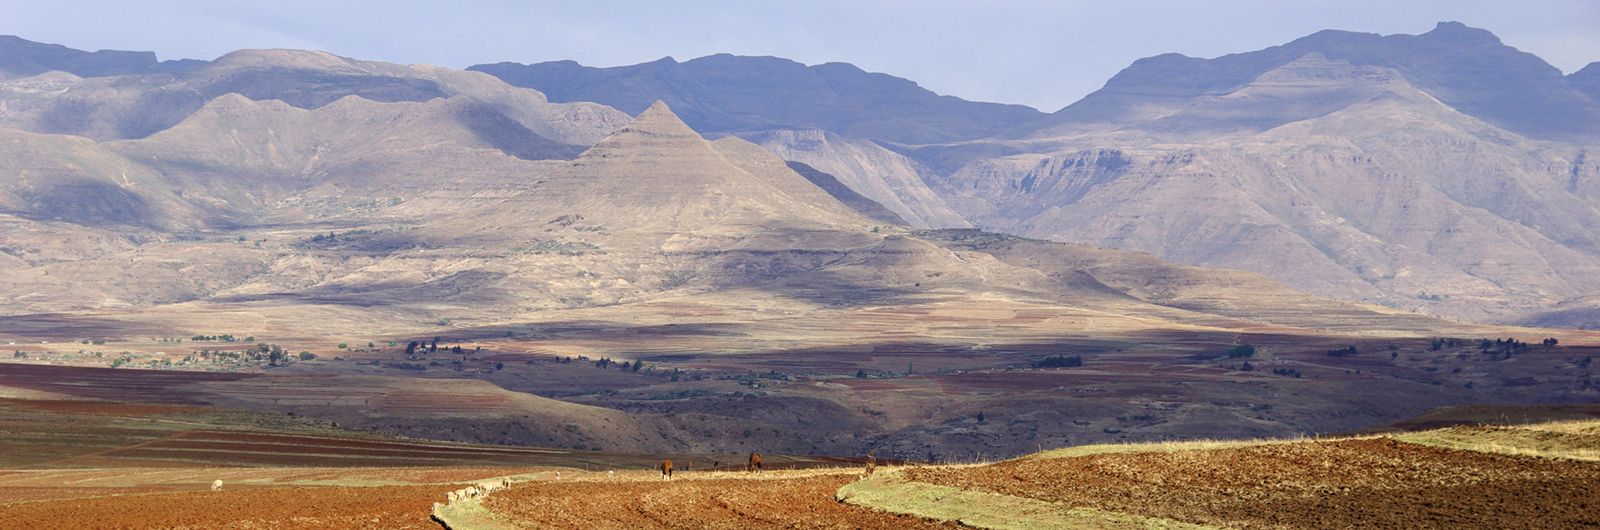 sudfrica lesotho